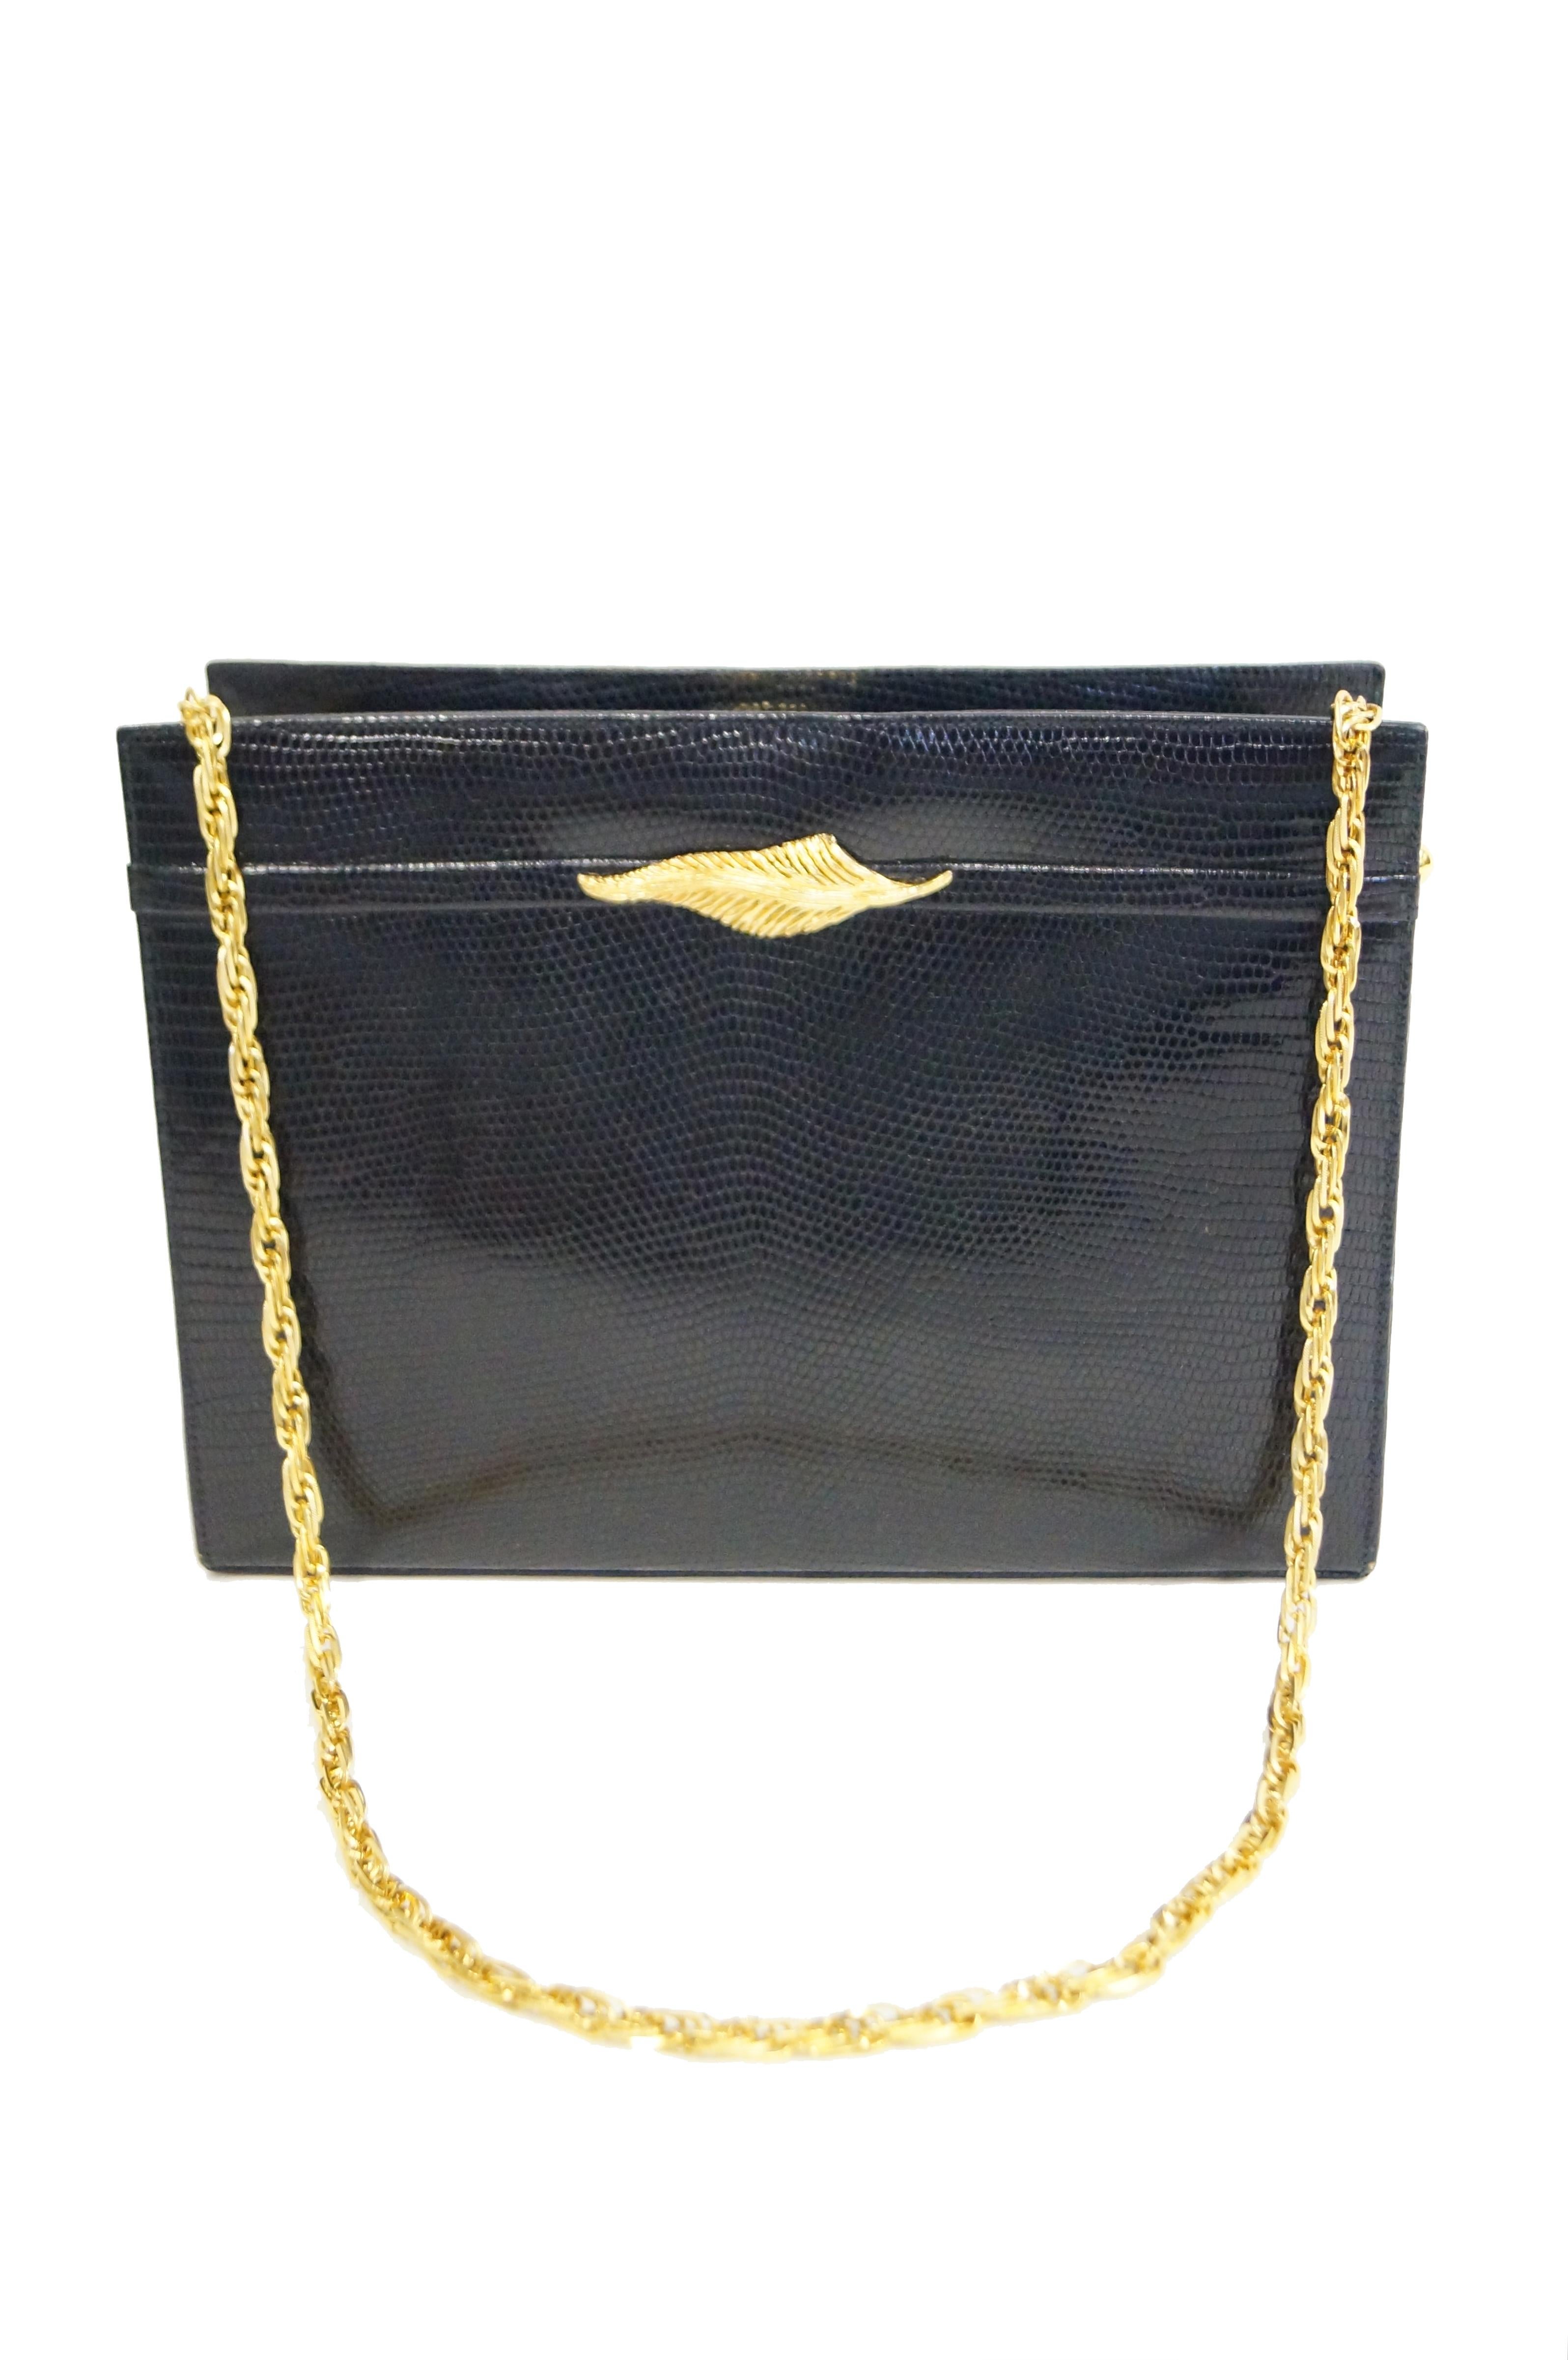 Black lizard hand bag with golden leaf detail on front. Sturdy leather construction with three compartments and zippered pocket.  Gold twist chain attached by gold knob hardware. Chain shoulder strap can be tucked into outer compartment as used as a